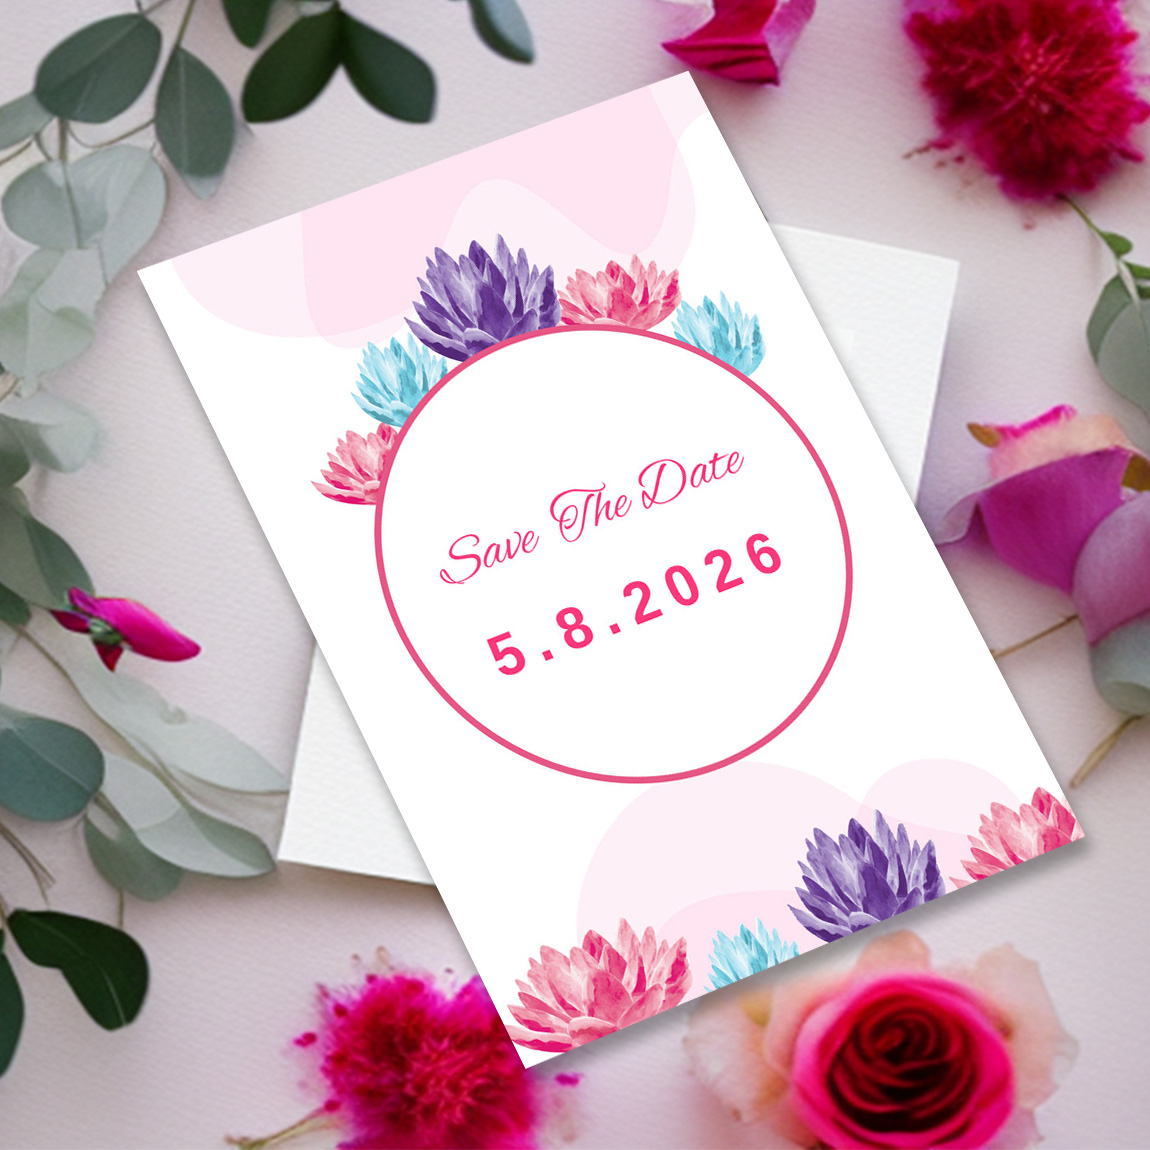 Lotuses Floral Wedding Invitation Card Template cover image.